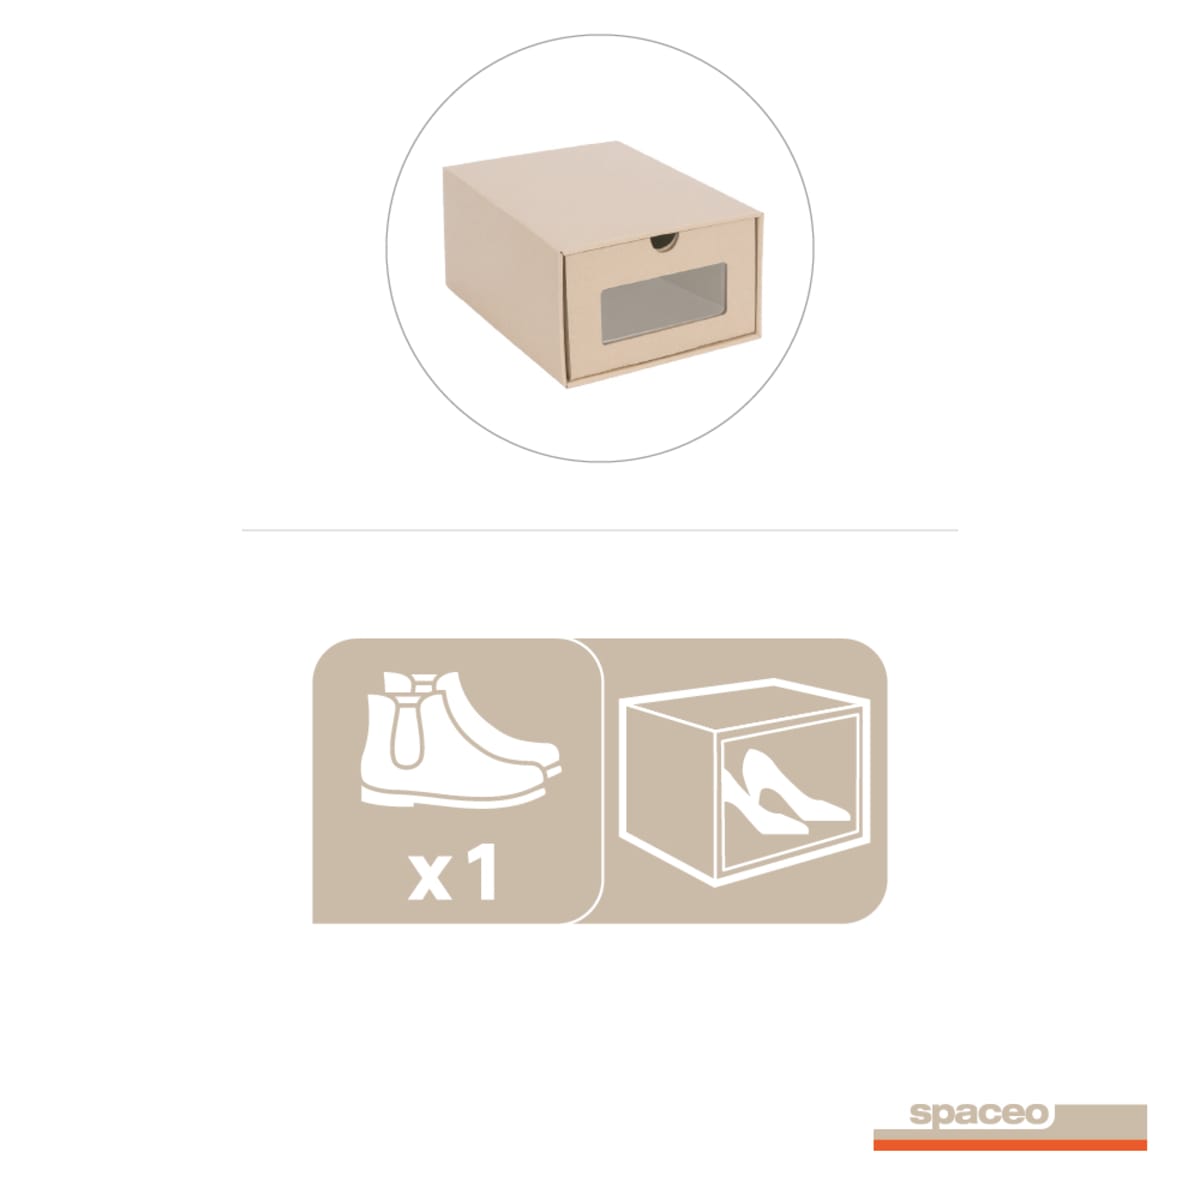 SET 2 CARDBOARD BOXES FOR WOMEN'S SHOES